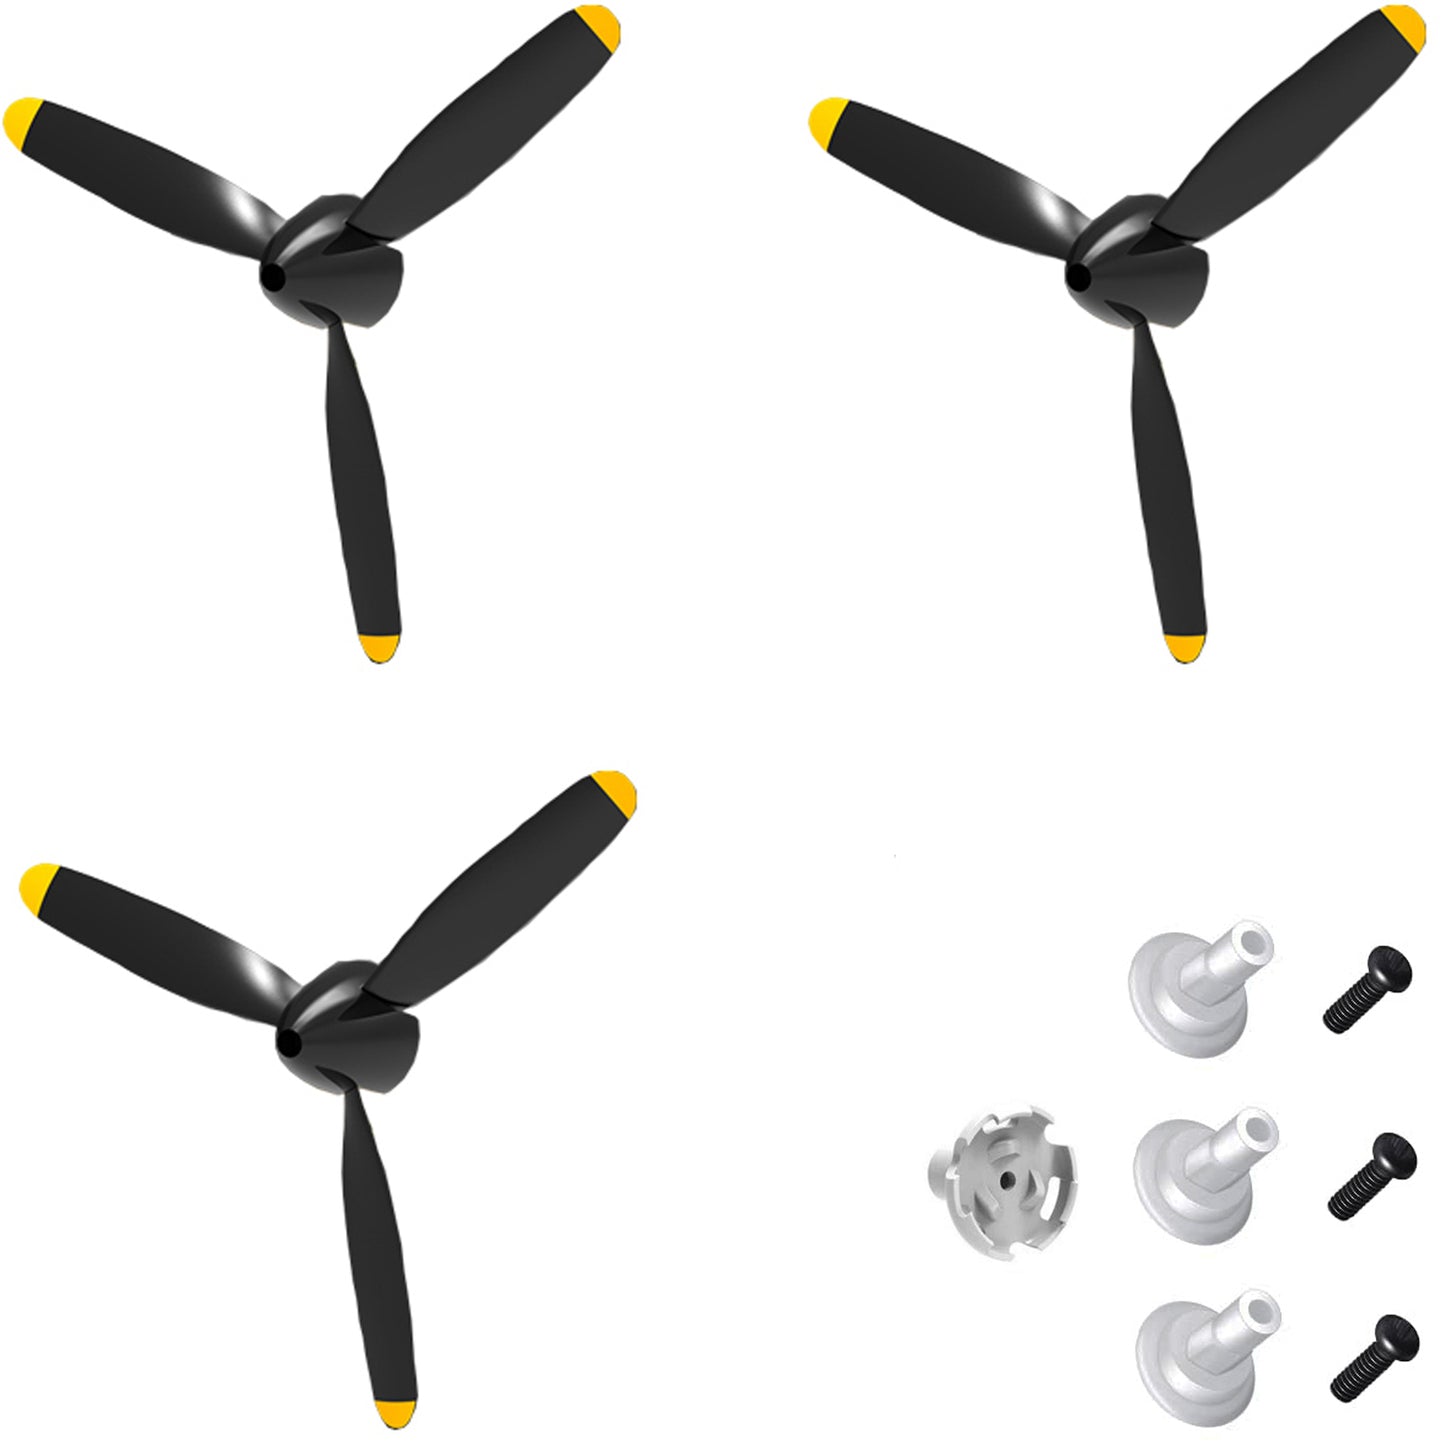 Volantexrc 3 Sets Rc Plane 3-Blade Propeller with Propeller Savers and one Adapters for VOLANTEXRC 761-11 761-12 761-13 P40 BF109 Airplane